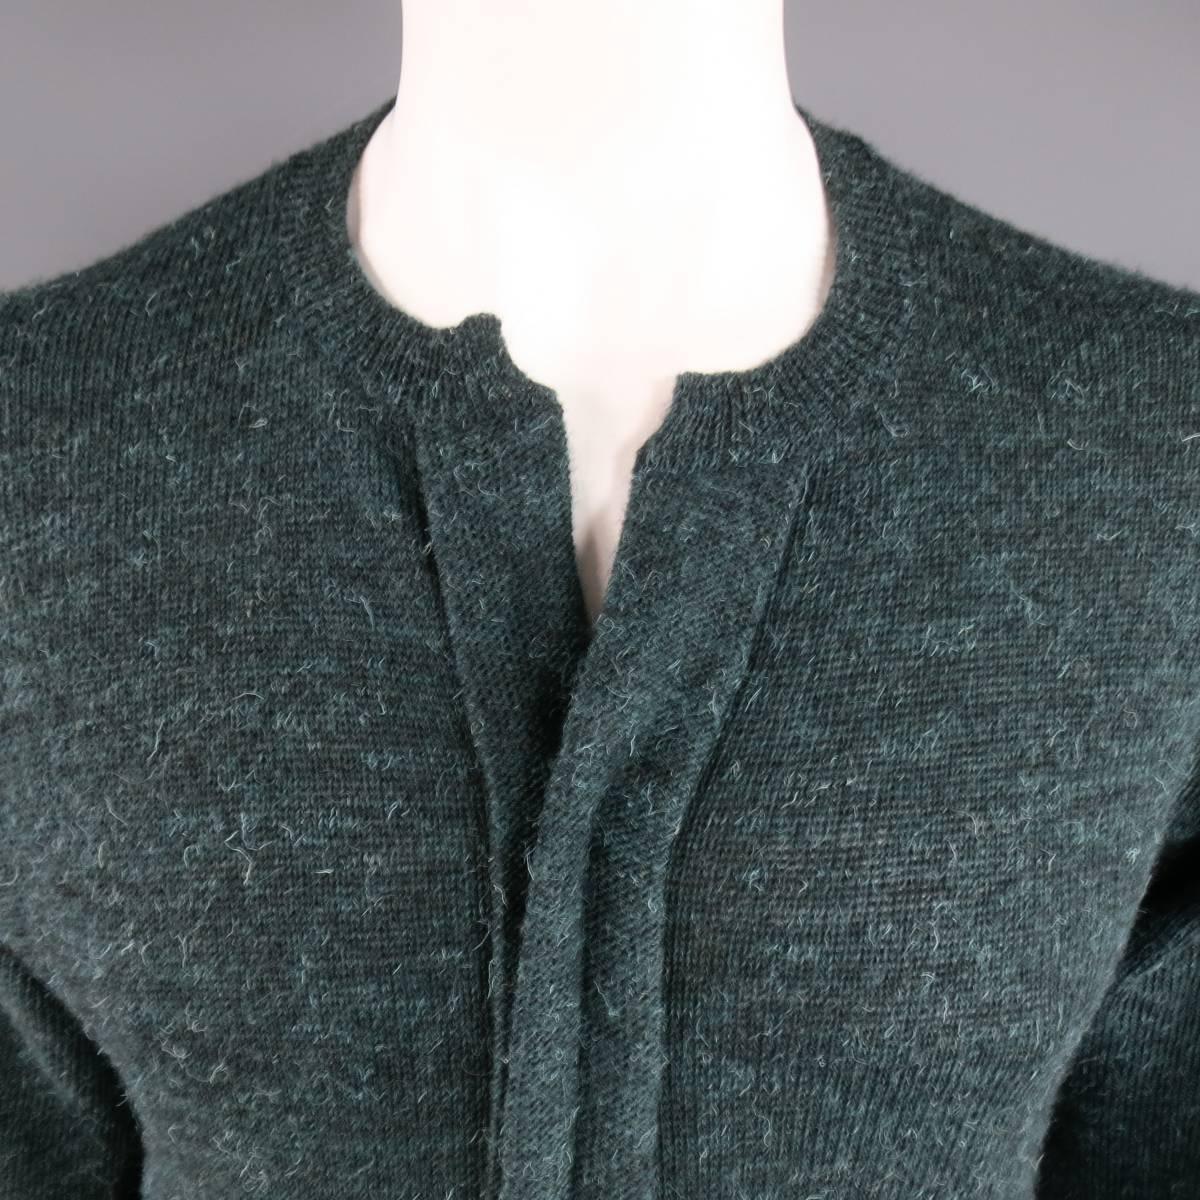 Vintage COMME des GARCONS HOMME pullover sweater in a forest green Heather textured fuzzy wool knit featuring a slit ribbed crewneck with frontal seam. Made in Japan.
 
Excellent Pre-Owned Condition.
Marked: JP 3 (AD 1997)
 
Measurements:
